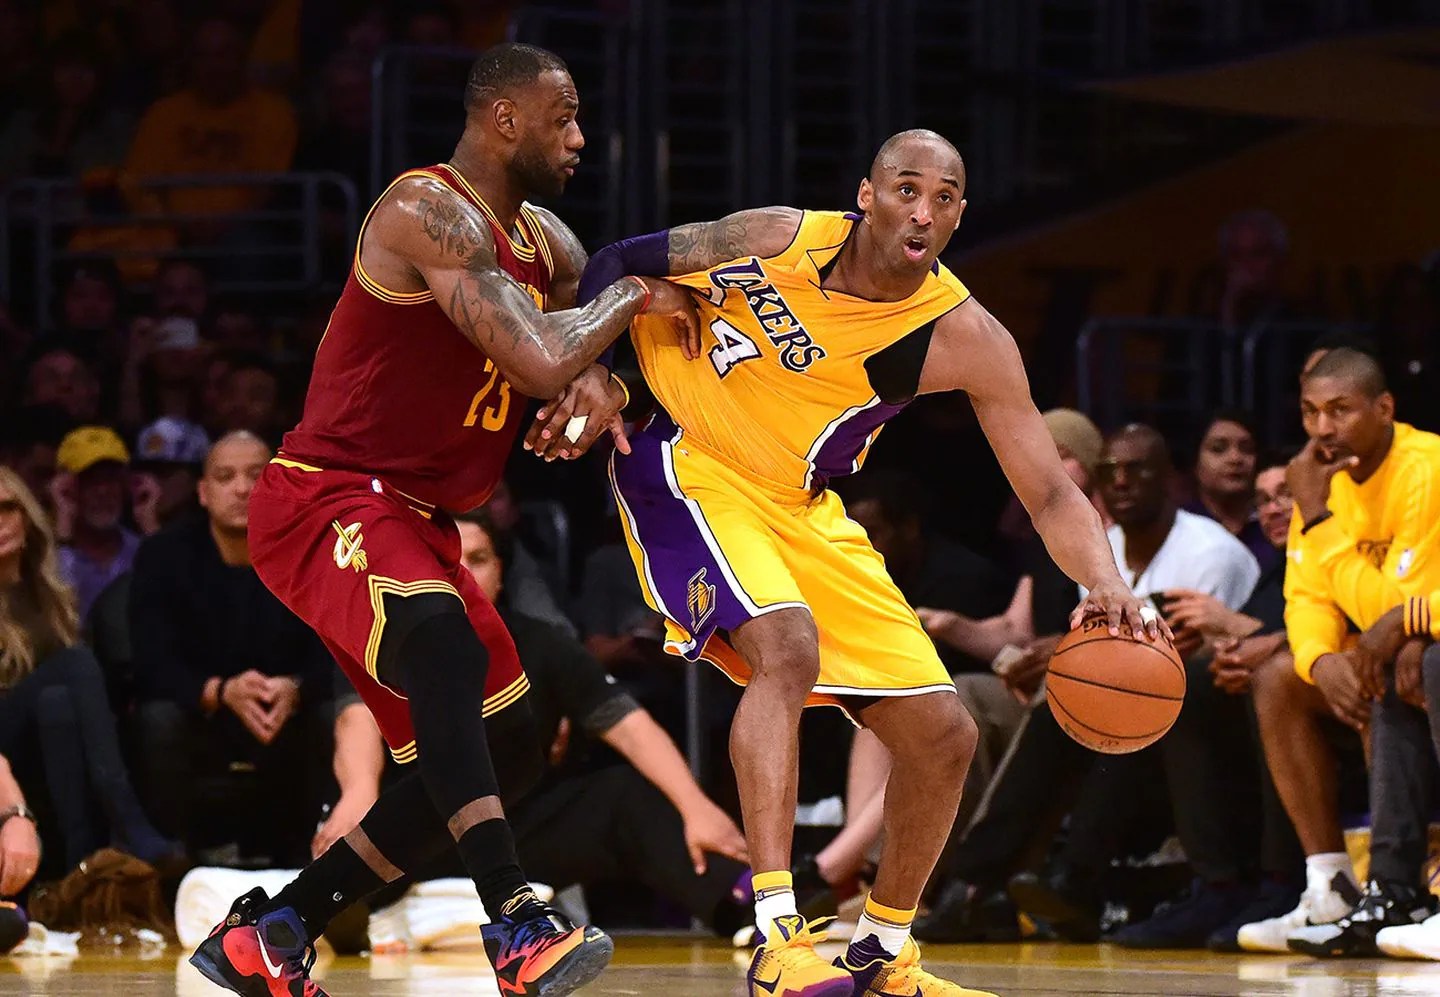 Where does Kobe Bryant rank among the NBA’s greatest players? The